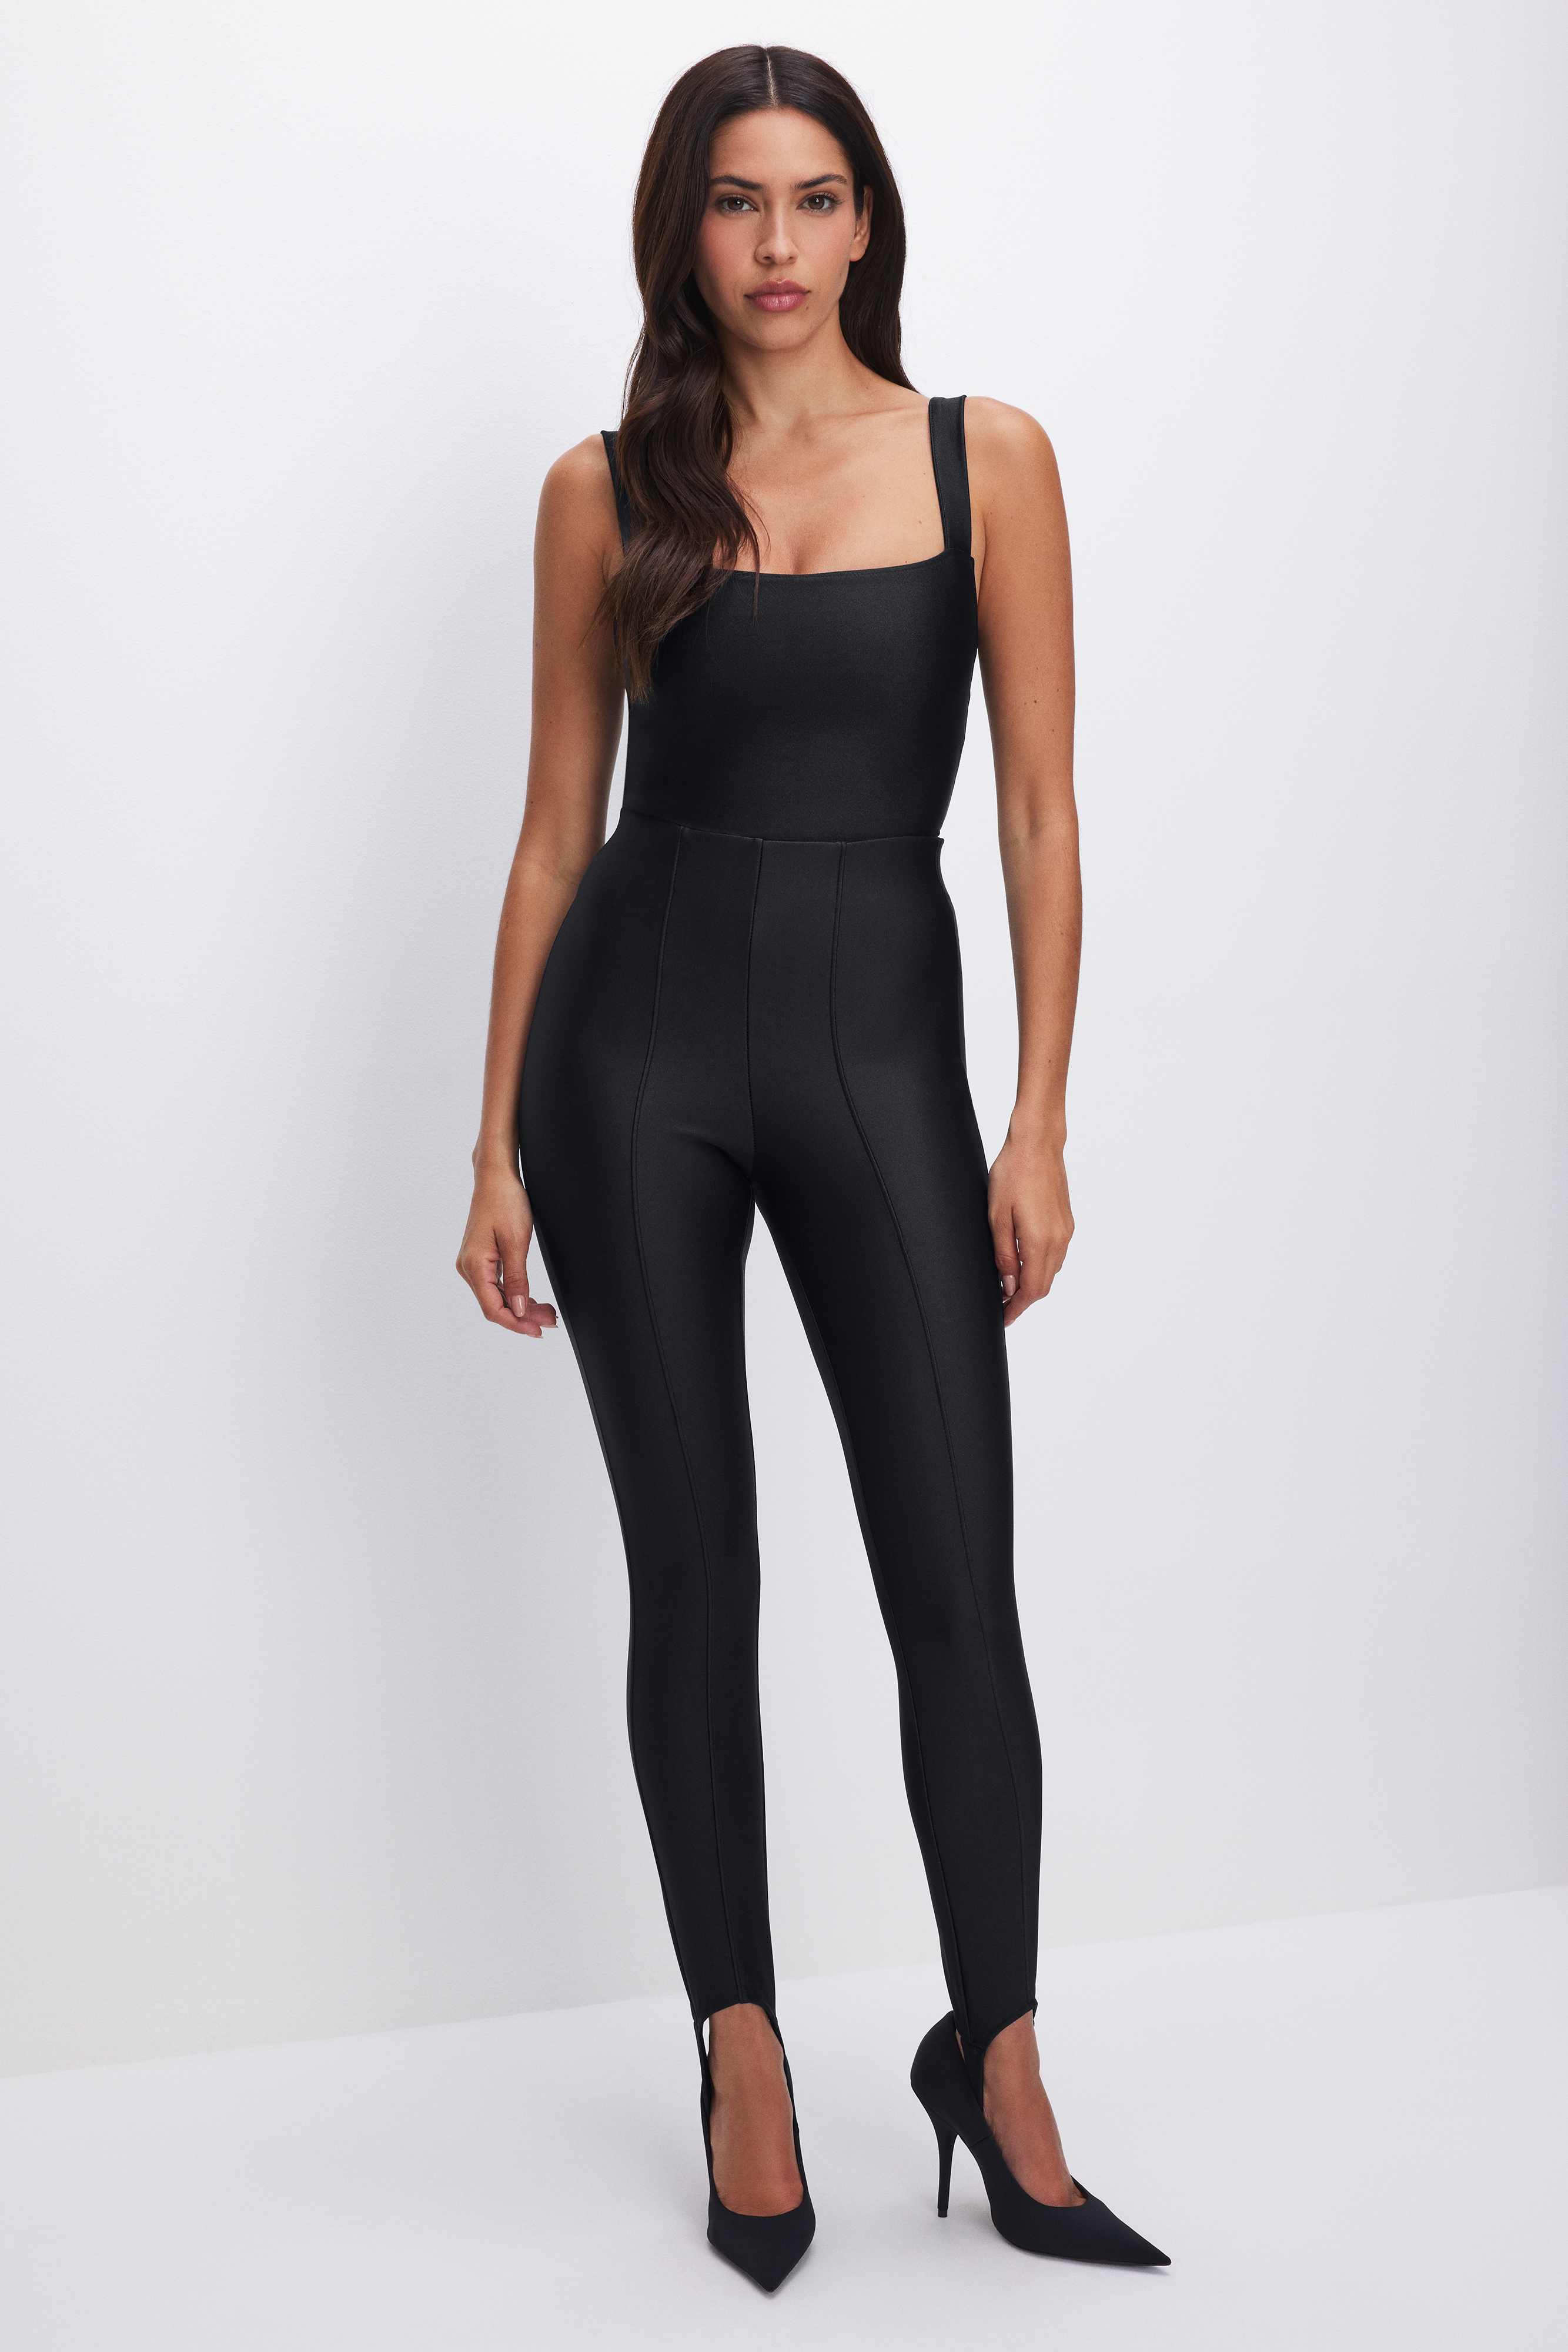 Styled with COMPRESSION SHINE STIRRUP PANTS | BLACK001